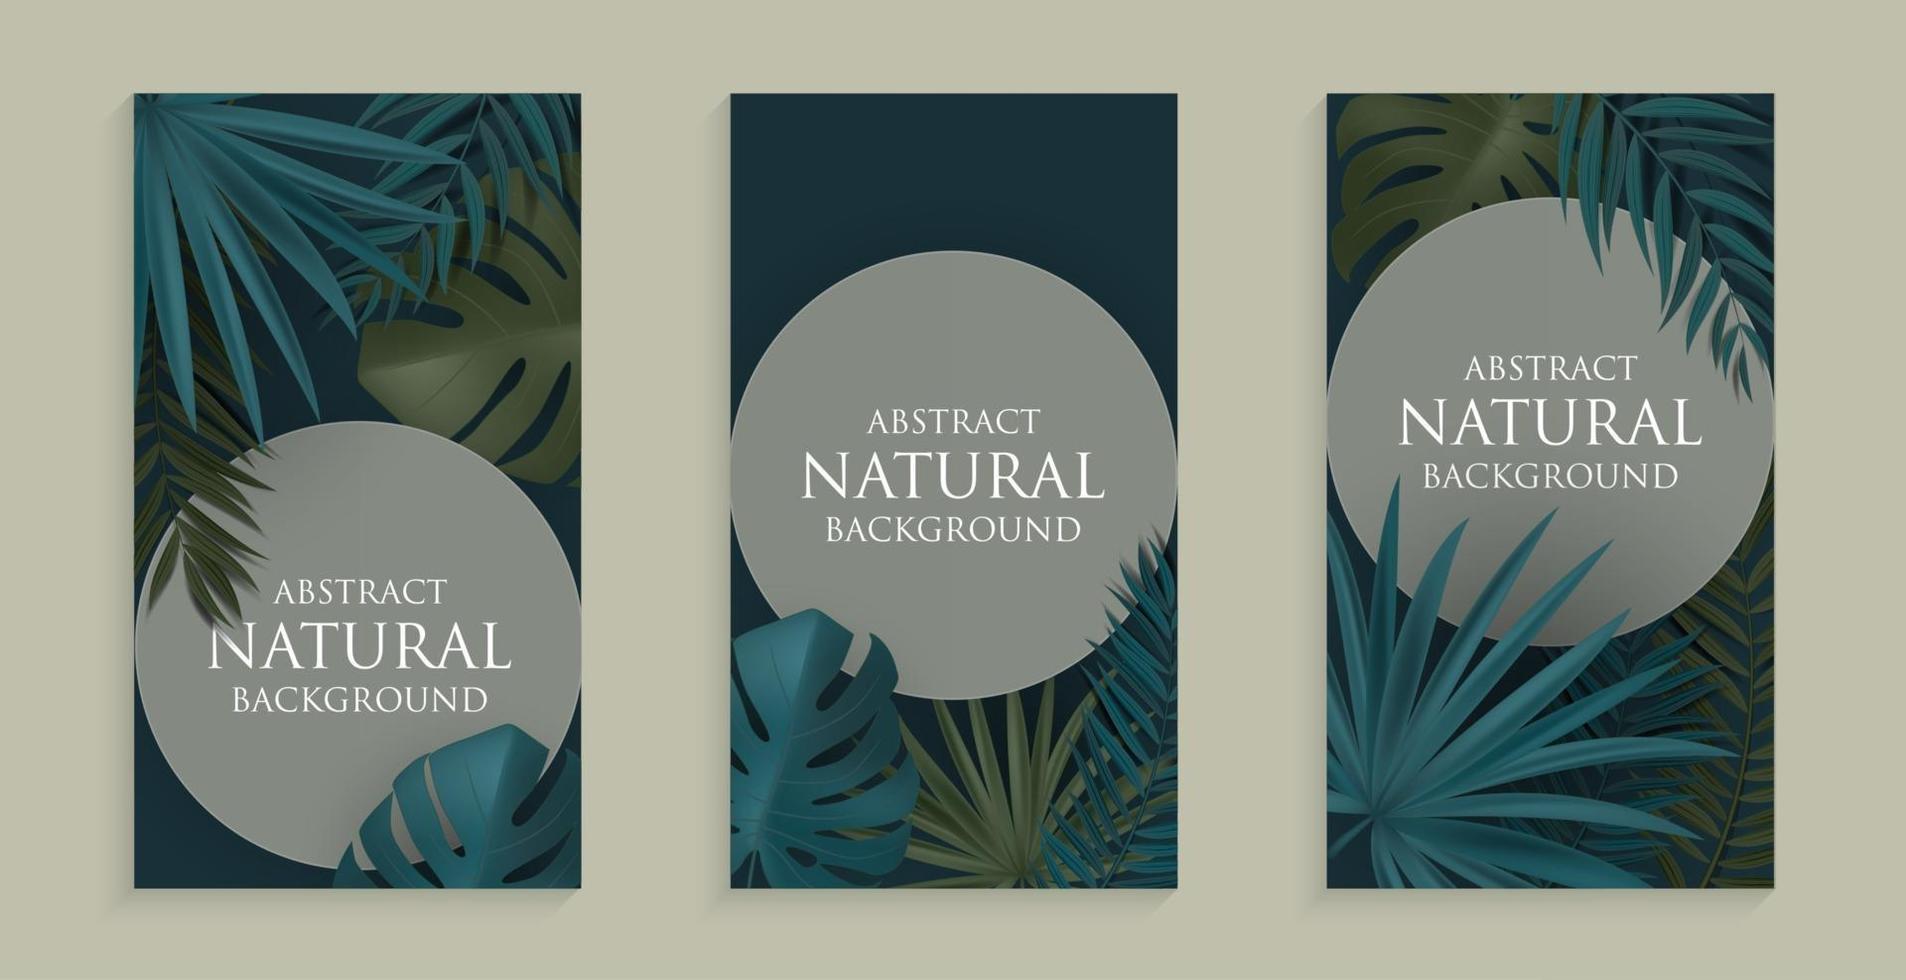 Abstract Natural Background with Tropical Palm and Monstera Leaves. Vector Illustration EPS10